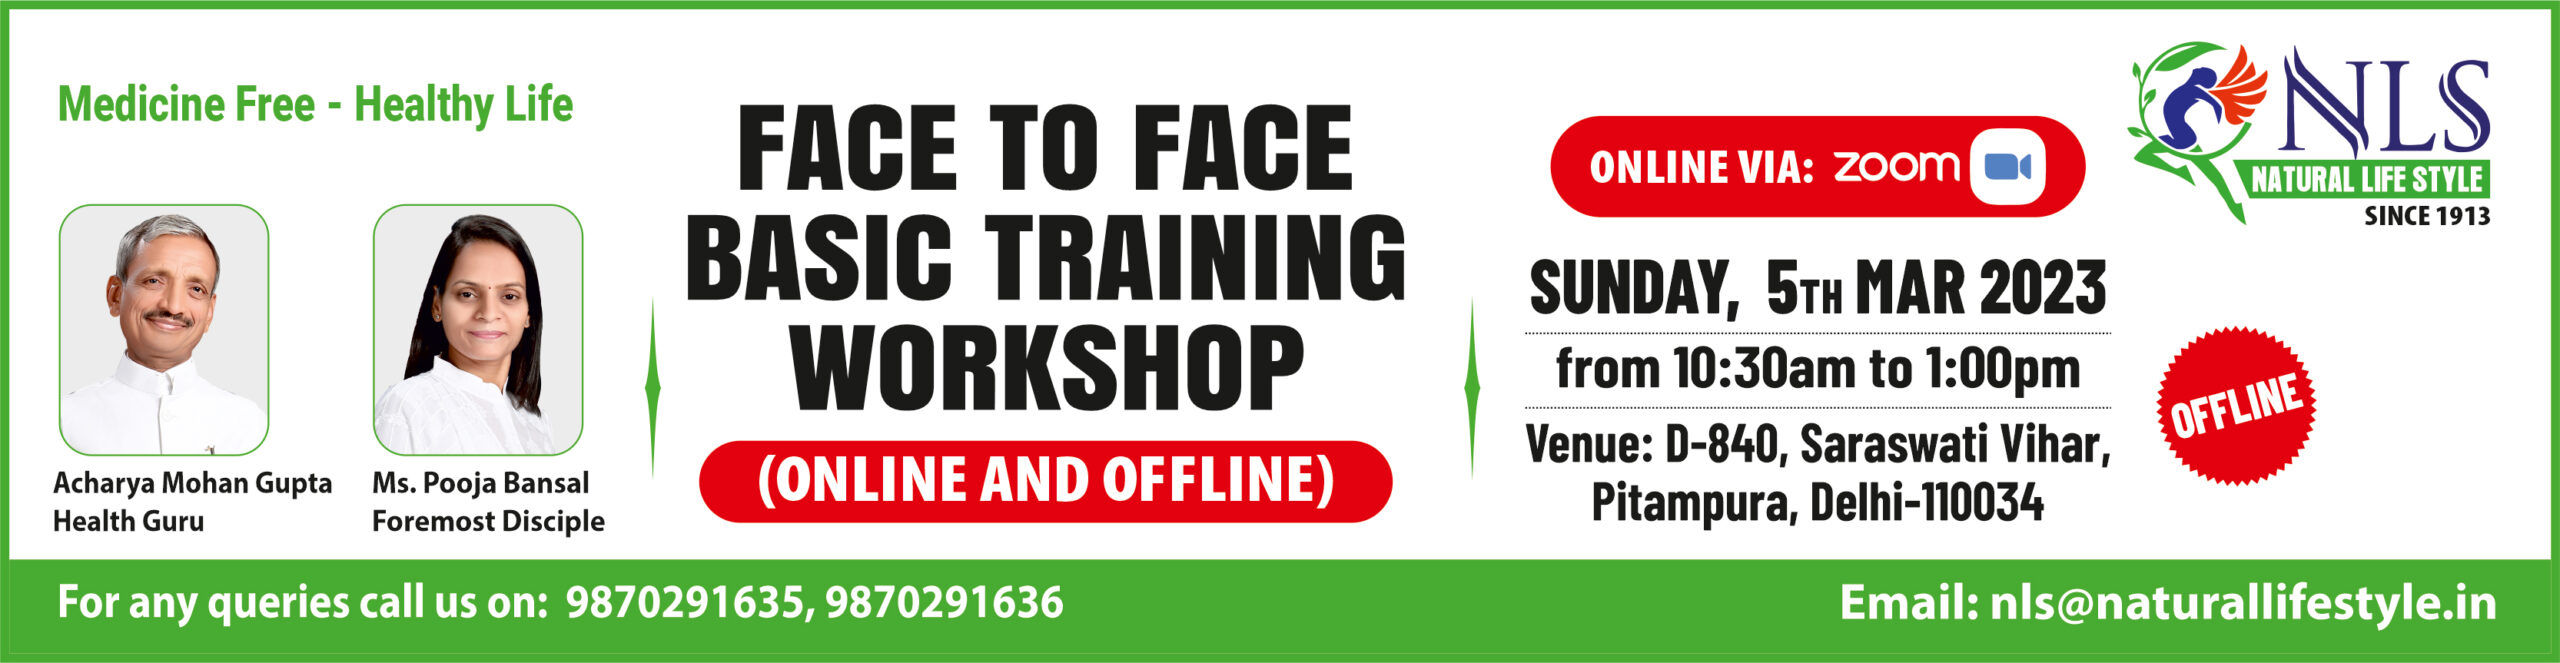 FACE TO FACE BASIC TRAINING WORKSHOP                                                                                                        ONLINE AND OFFLINE